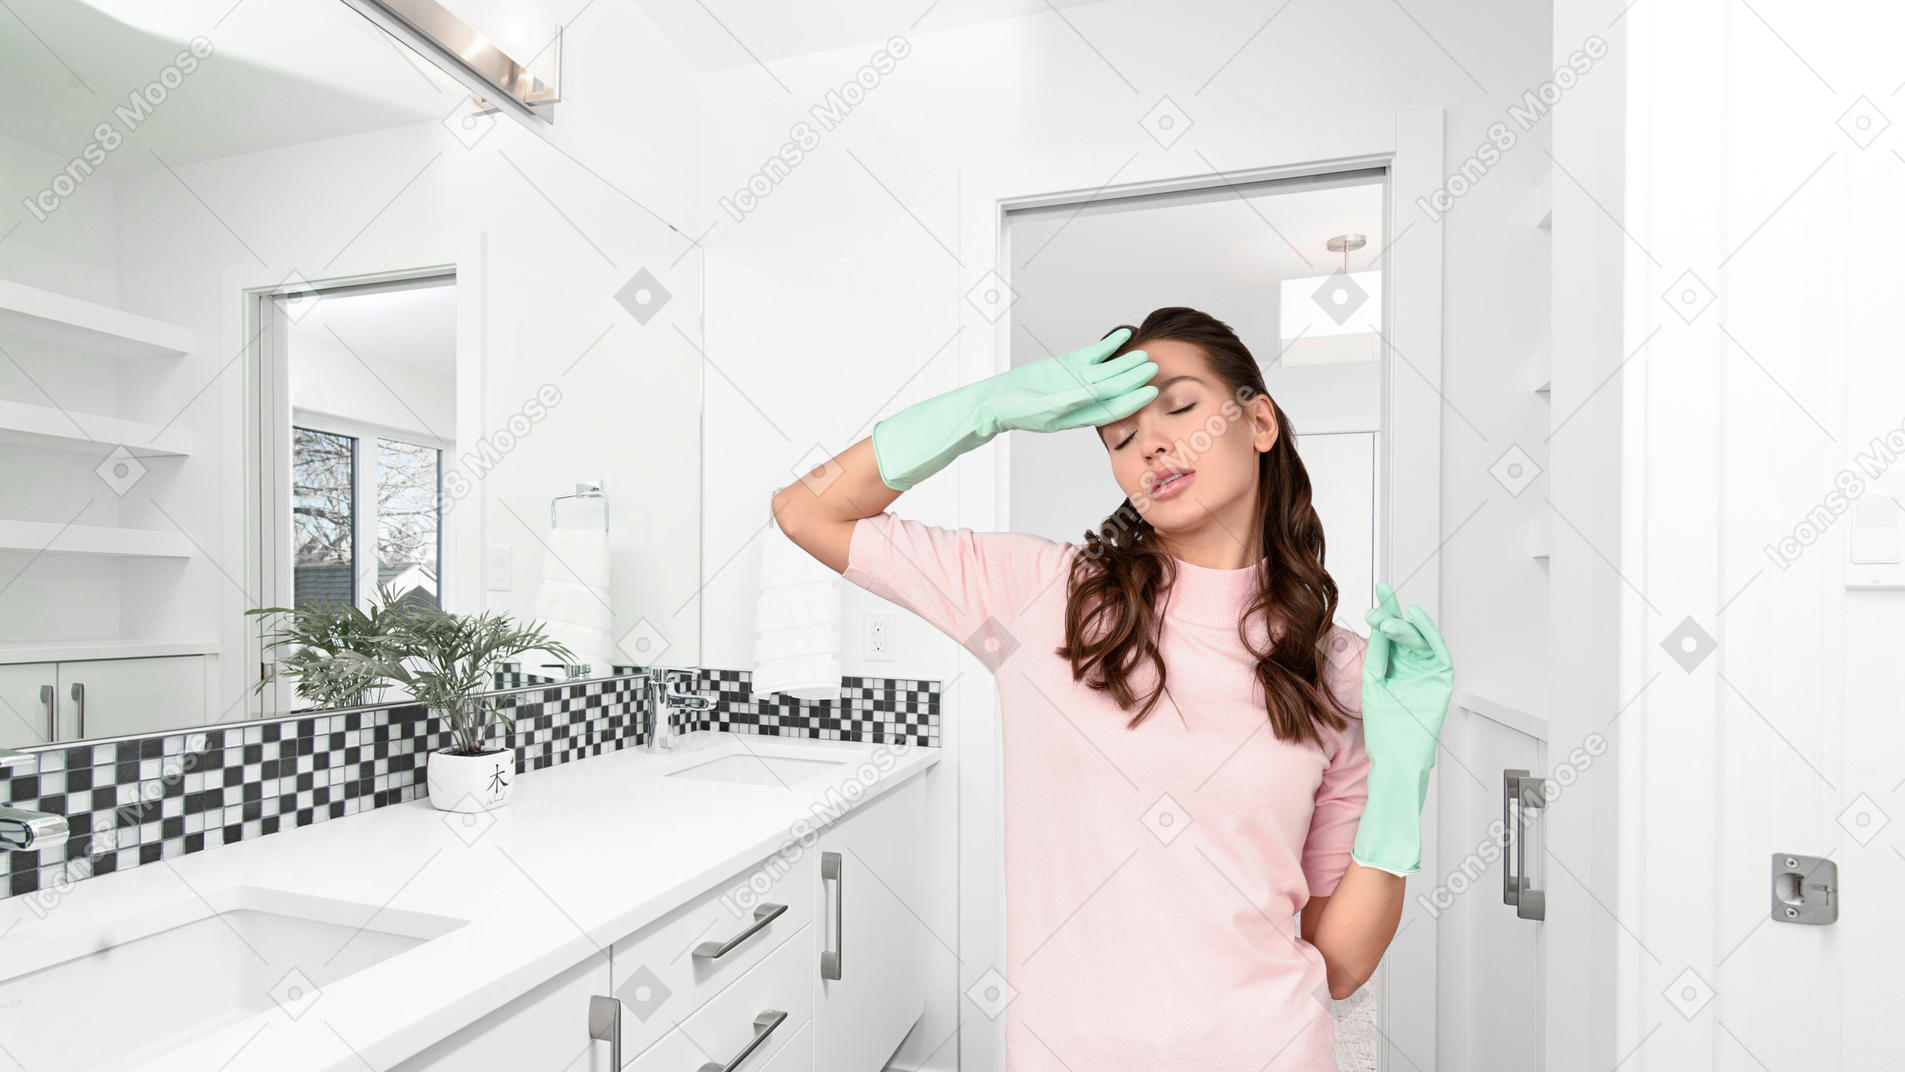 Woman tired of cleaning the bathroom